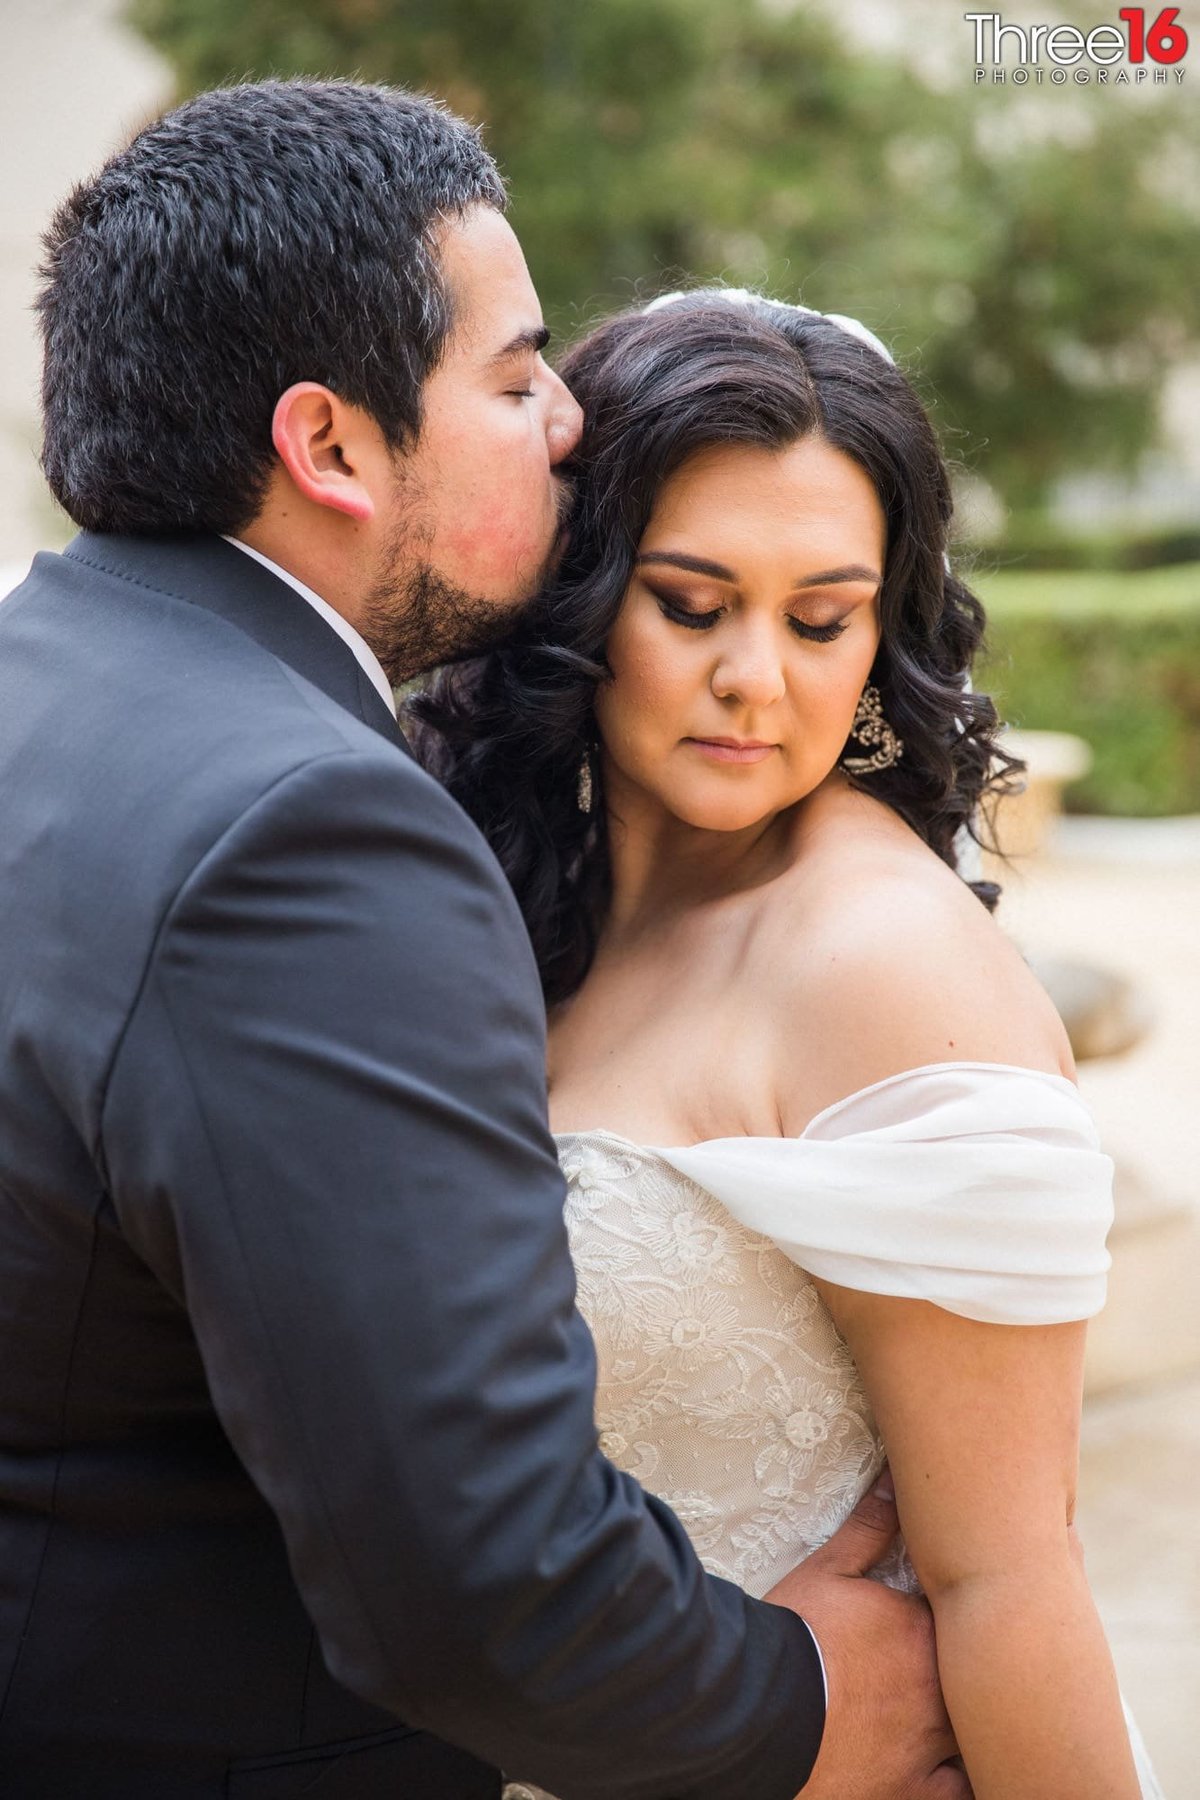 Groom to be romantically kisses his Bride's head as he embraces her